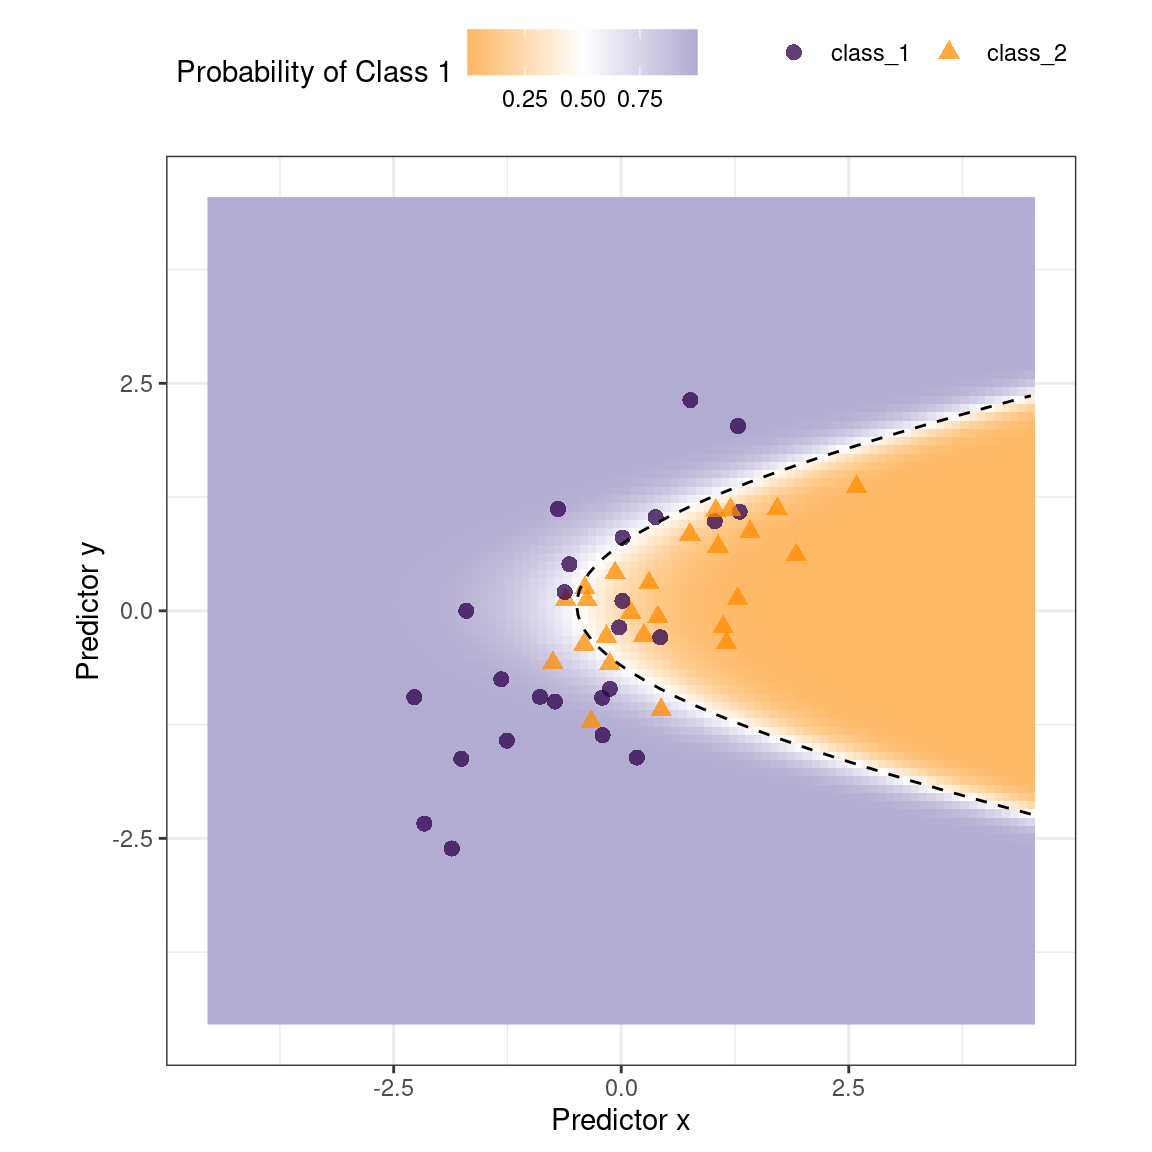 Simulated two class data set with a logistic regression fit and decision boundary. The scatter plot of the two classes shows fairly correlated data. The decision boundary is a parabola in the x axis that does a good job of separating the classes.